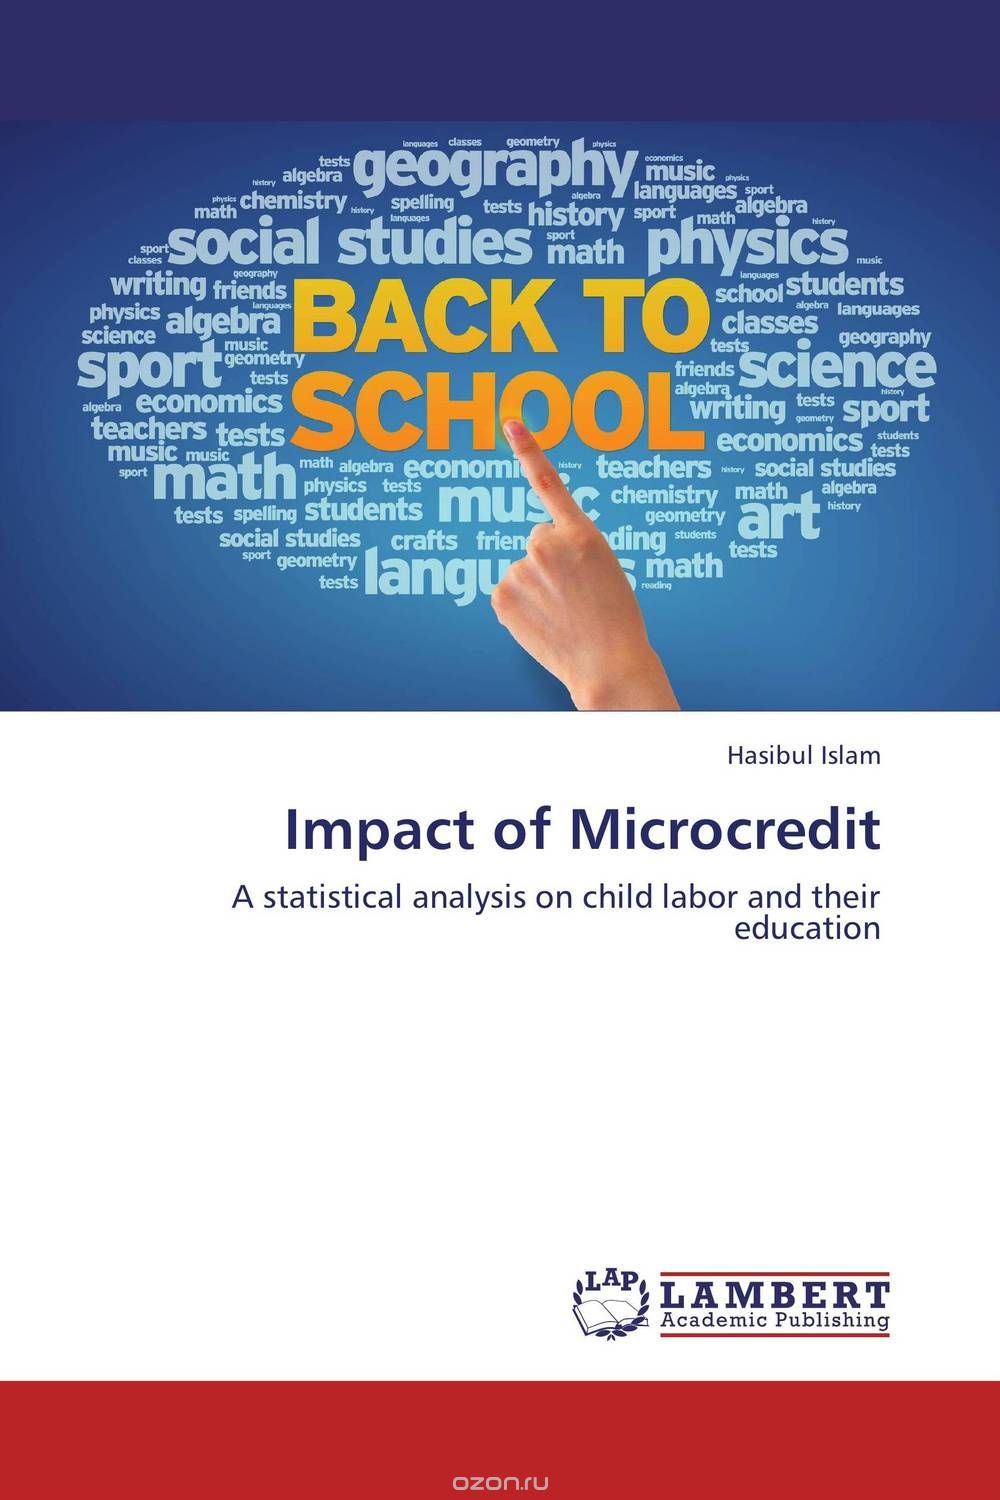 Impact of Microcredit